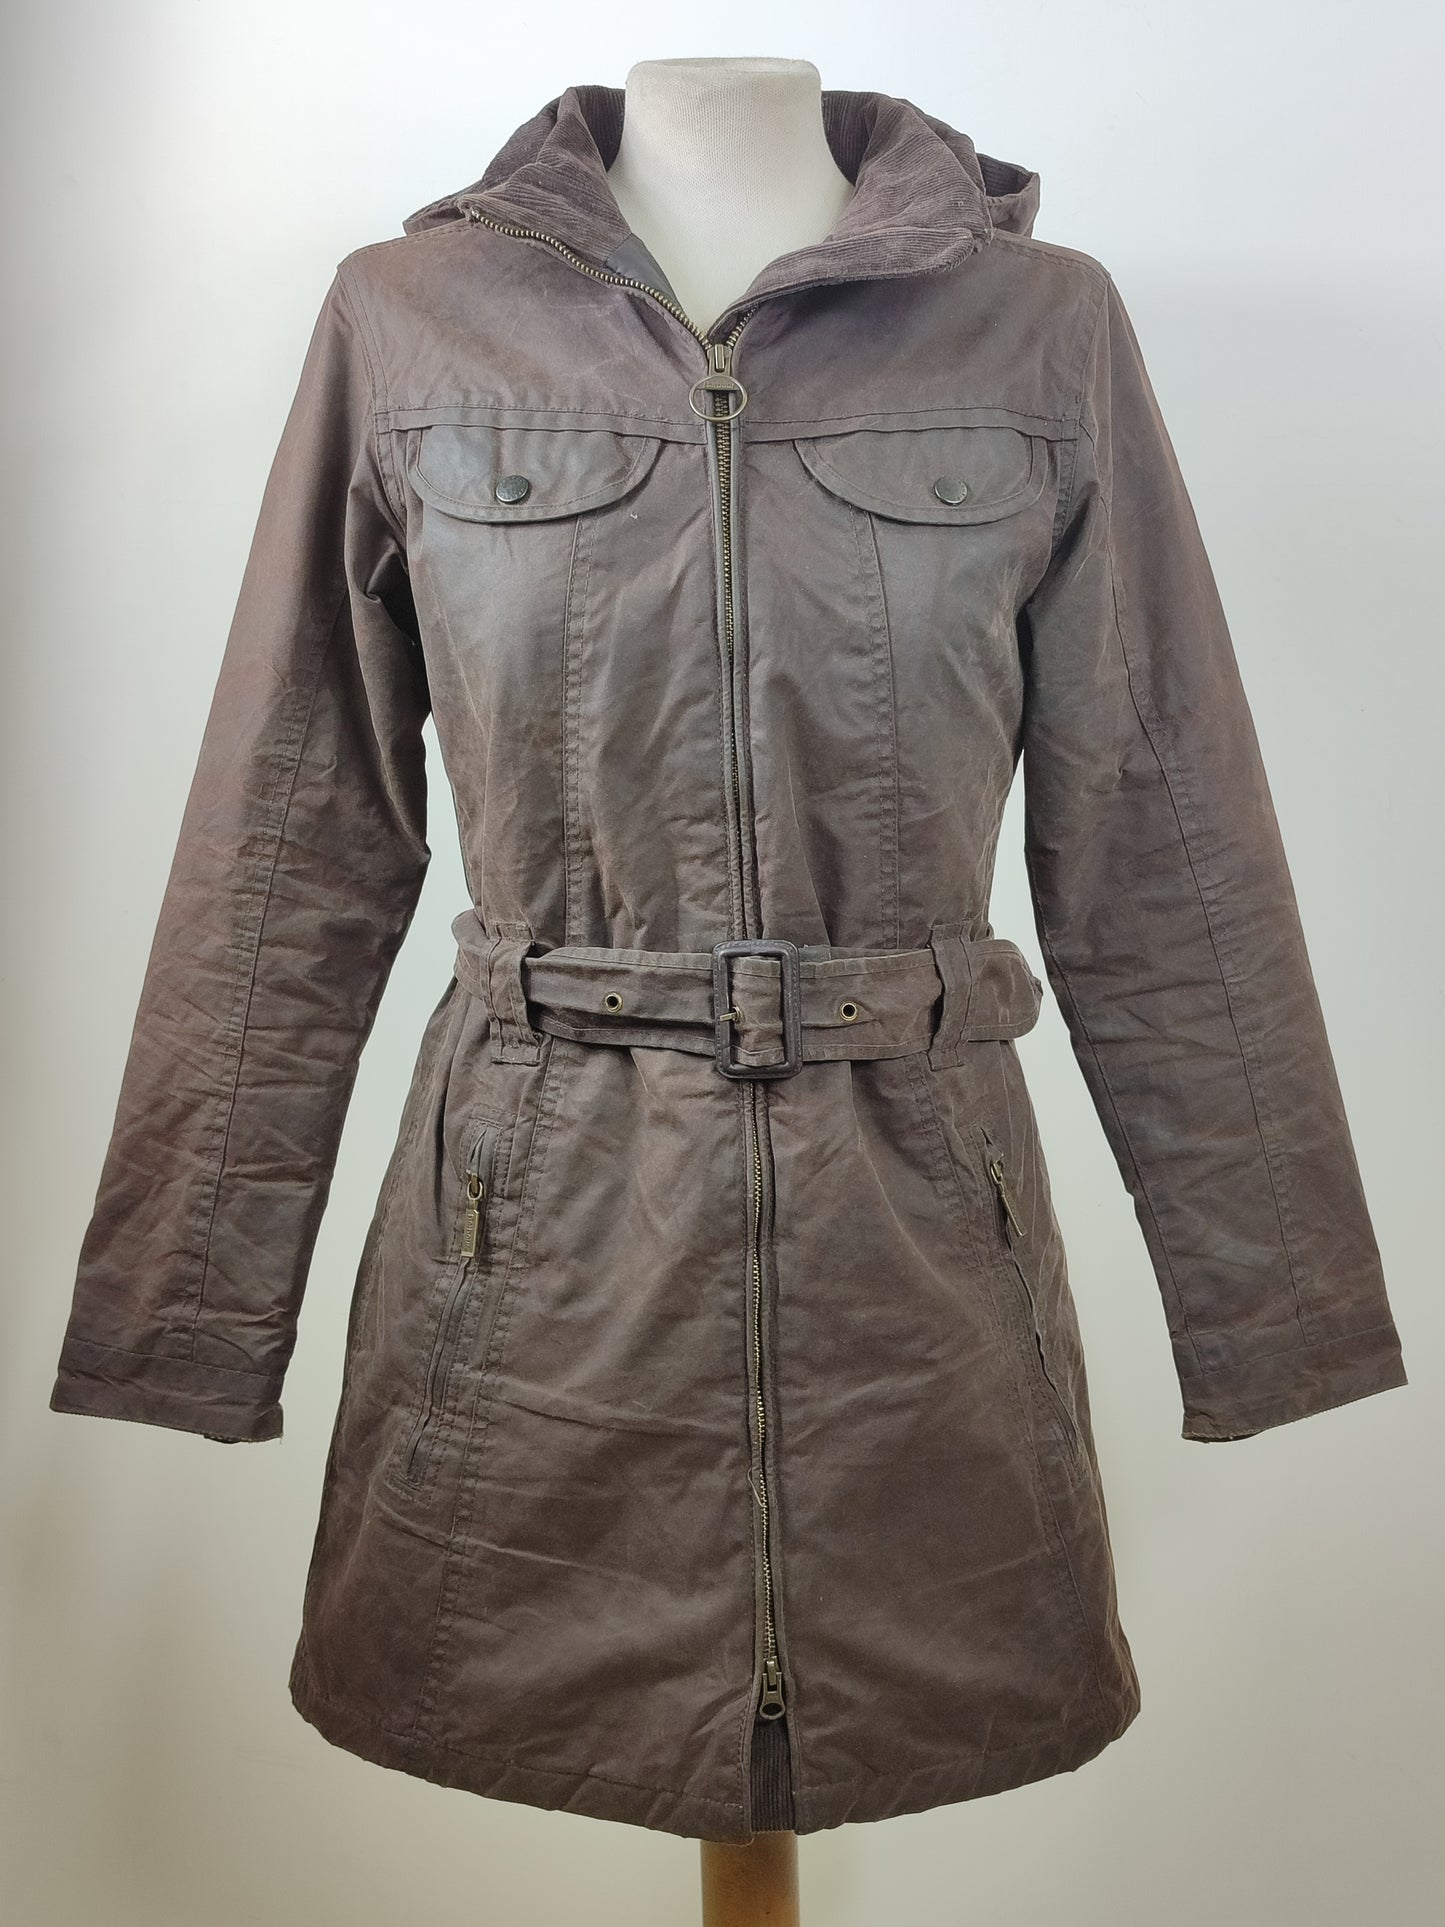 Giacca Barbour da donna marrone XSmall tg.38-Lady Cameron Brown waxed Jacket uk8